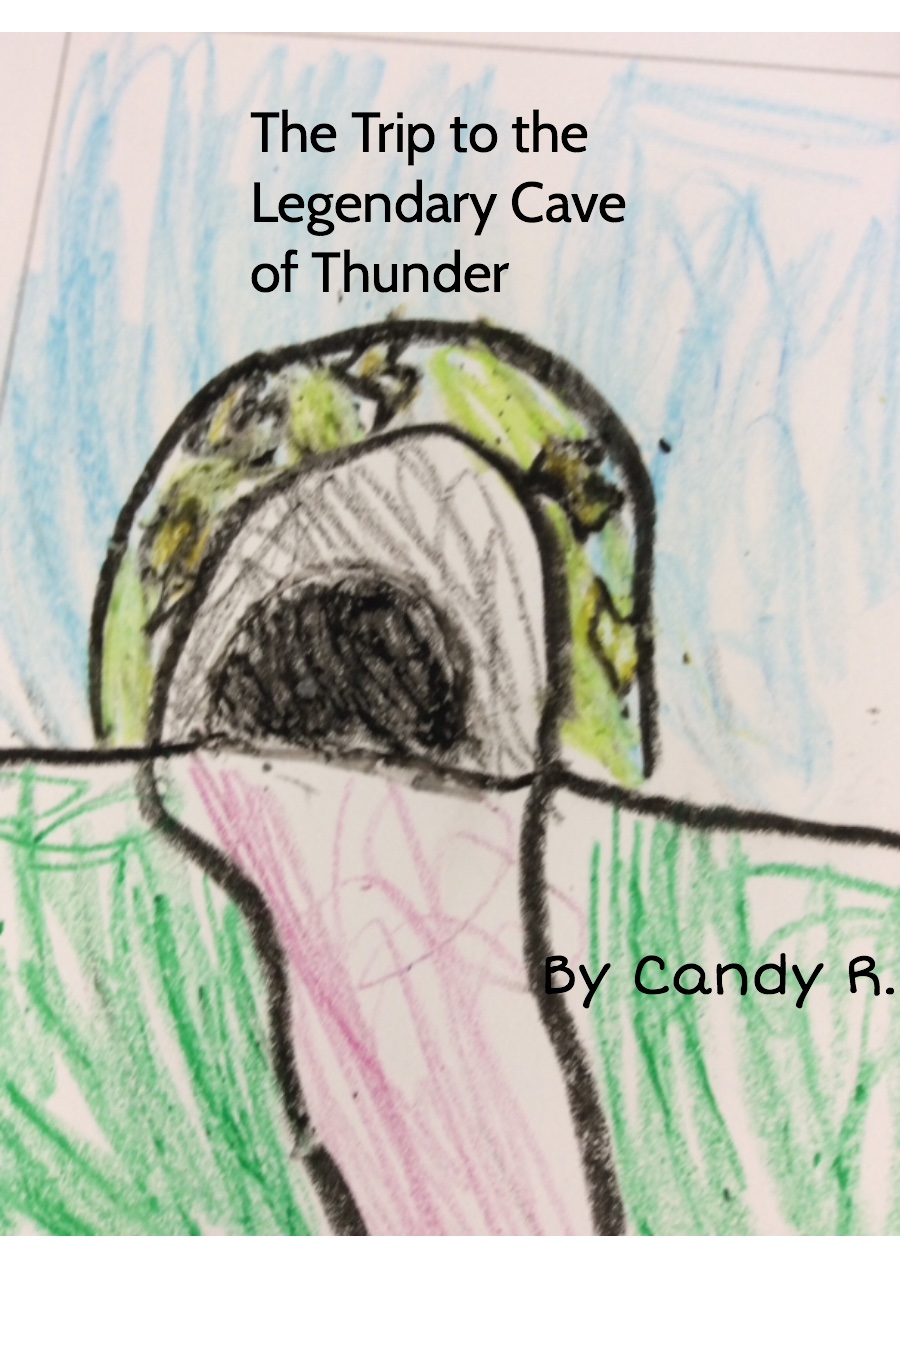 The Trip to the Legendary Cave of Thunder by Candy R